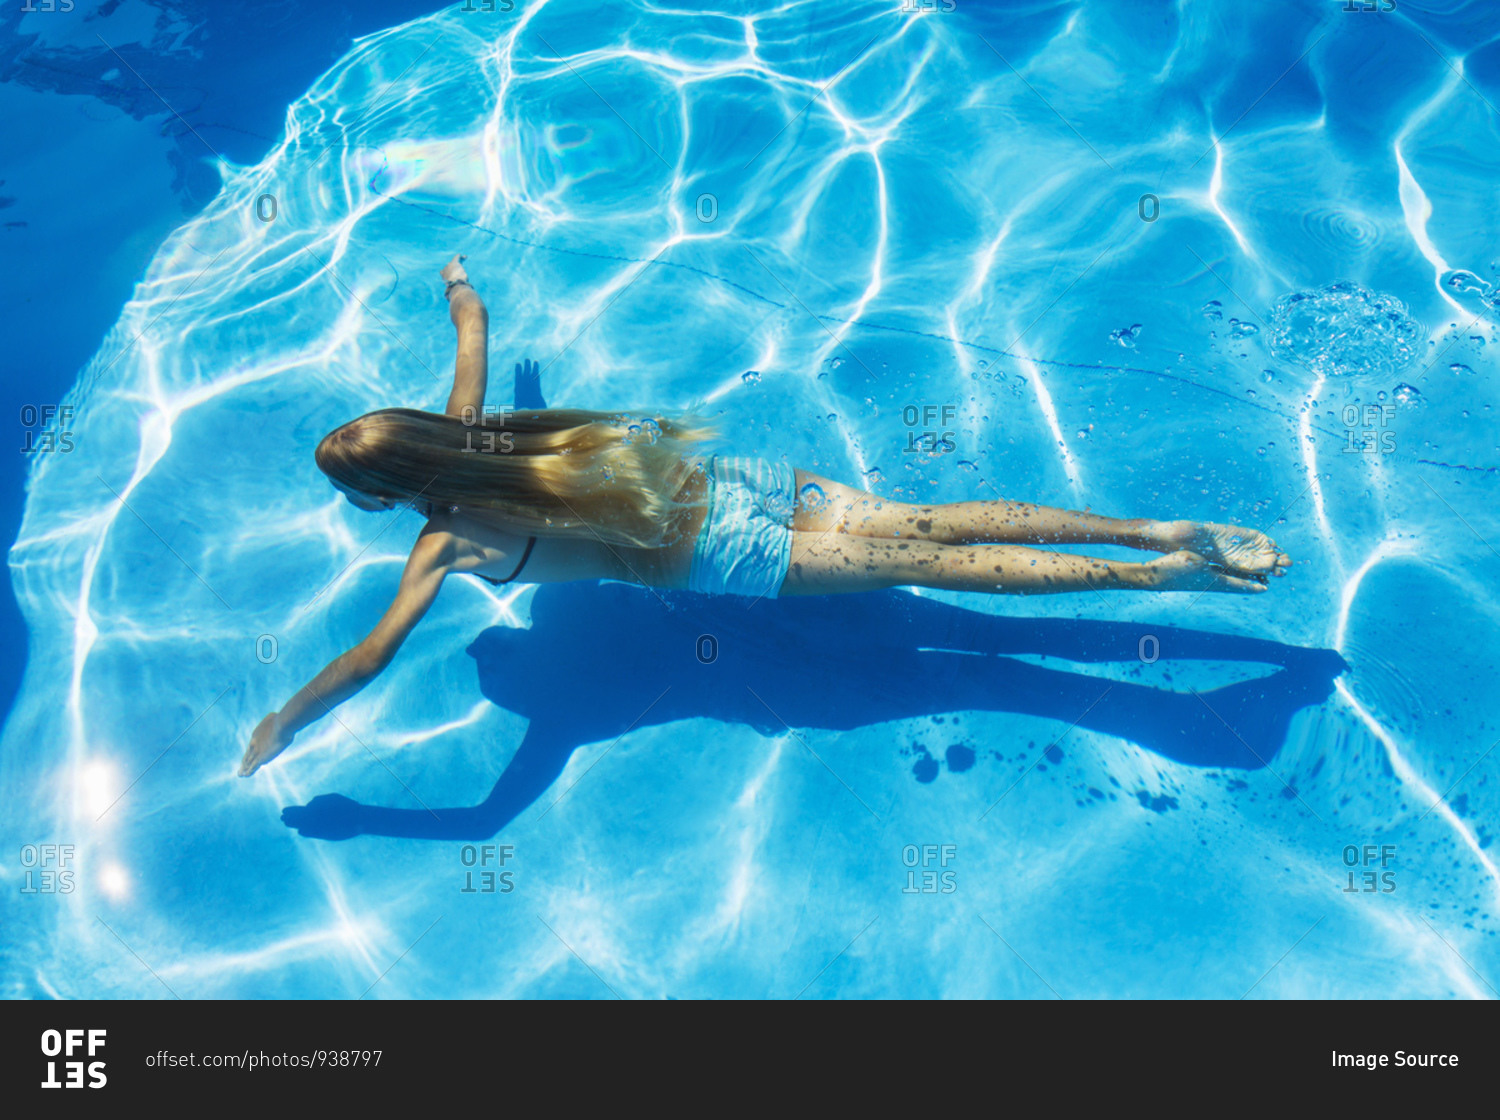 Girl swimming underwater in outdoor swimming pool, high angle view, Vernazza, Liguria, Italy